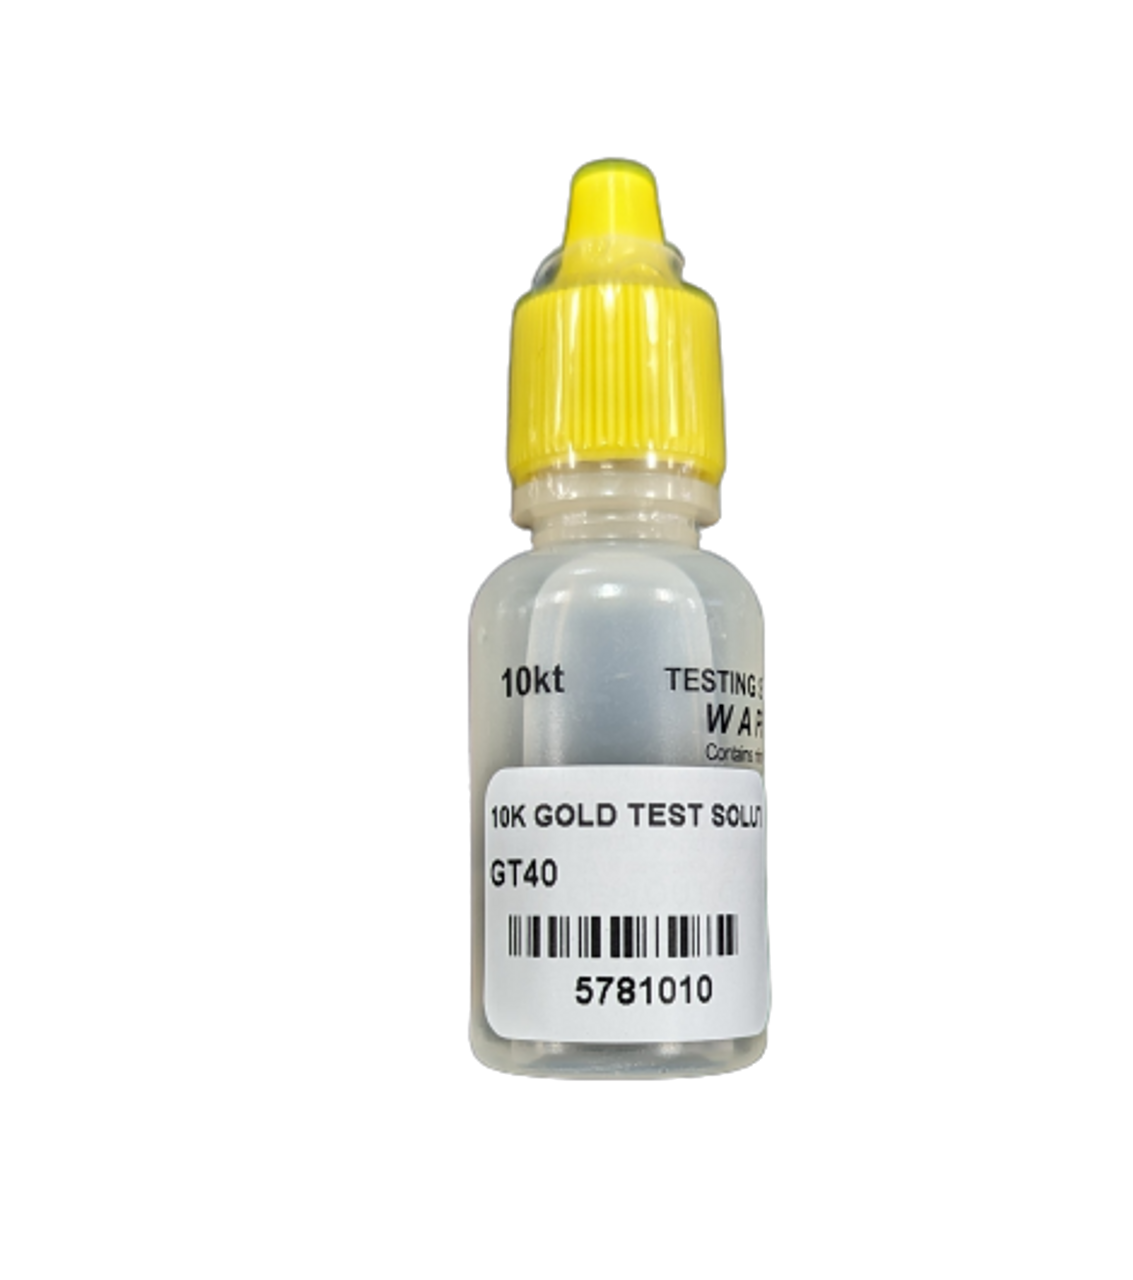  14k Gold Testing Acid 10 Bottles Plus Box of PuriTEST Deluxe  Test Stones : Arts, Crafts & Sewing